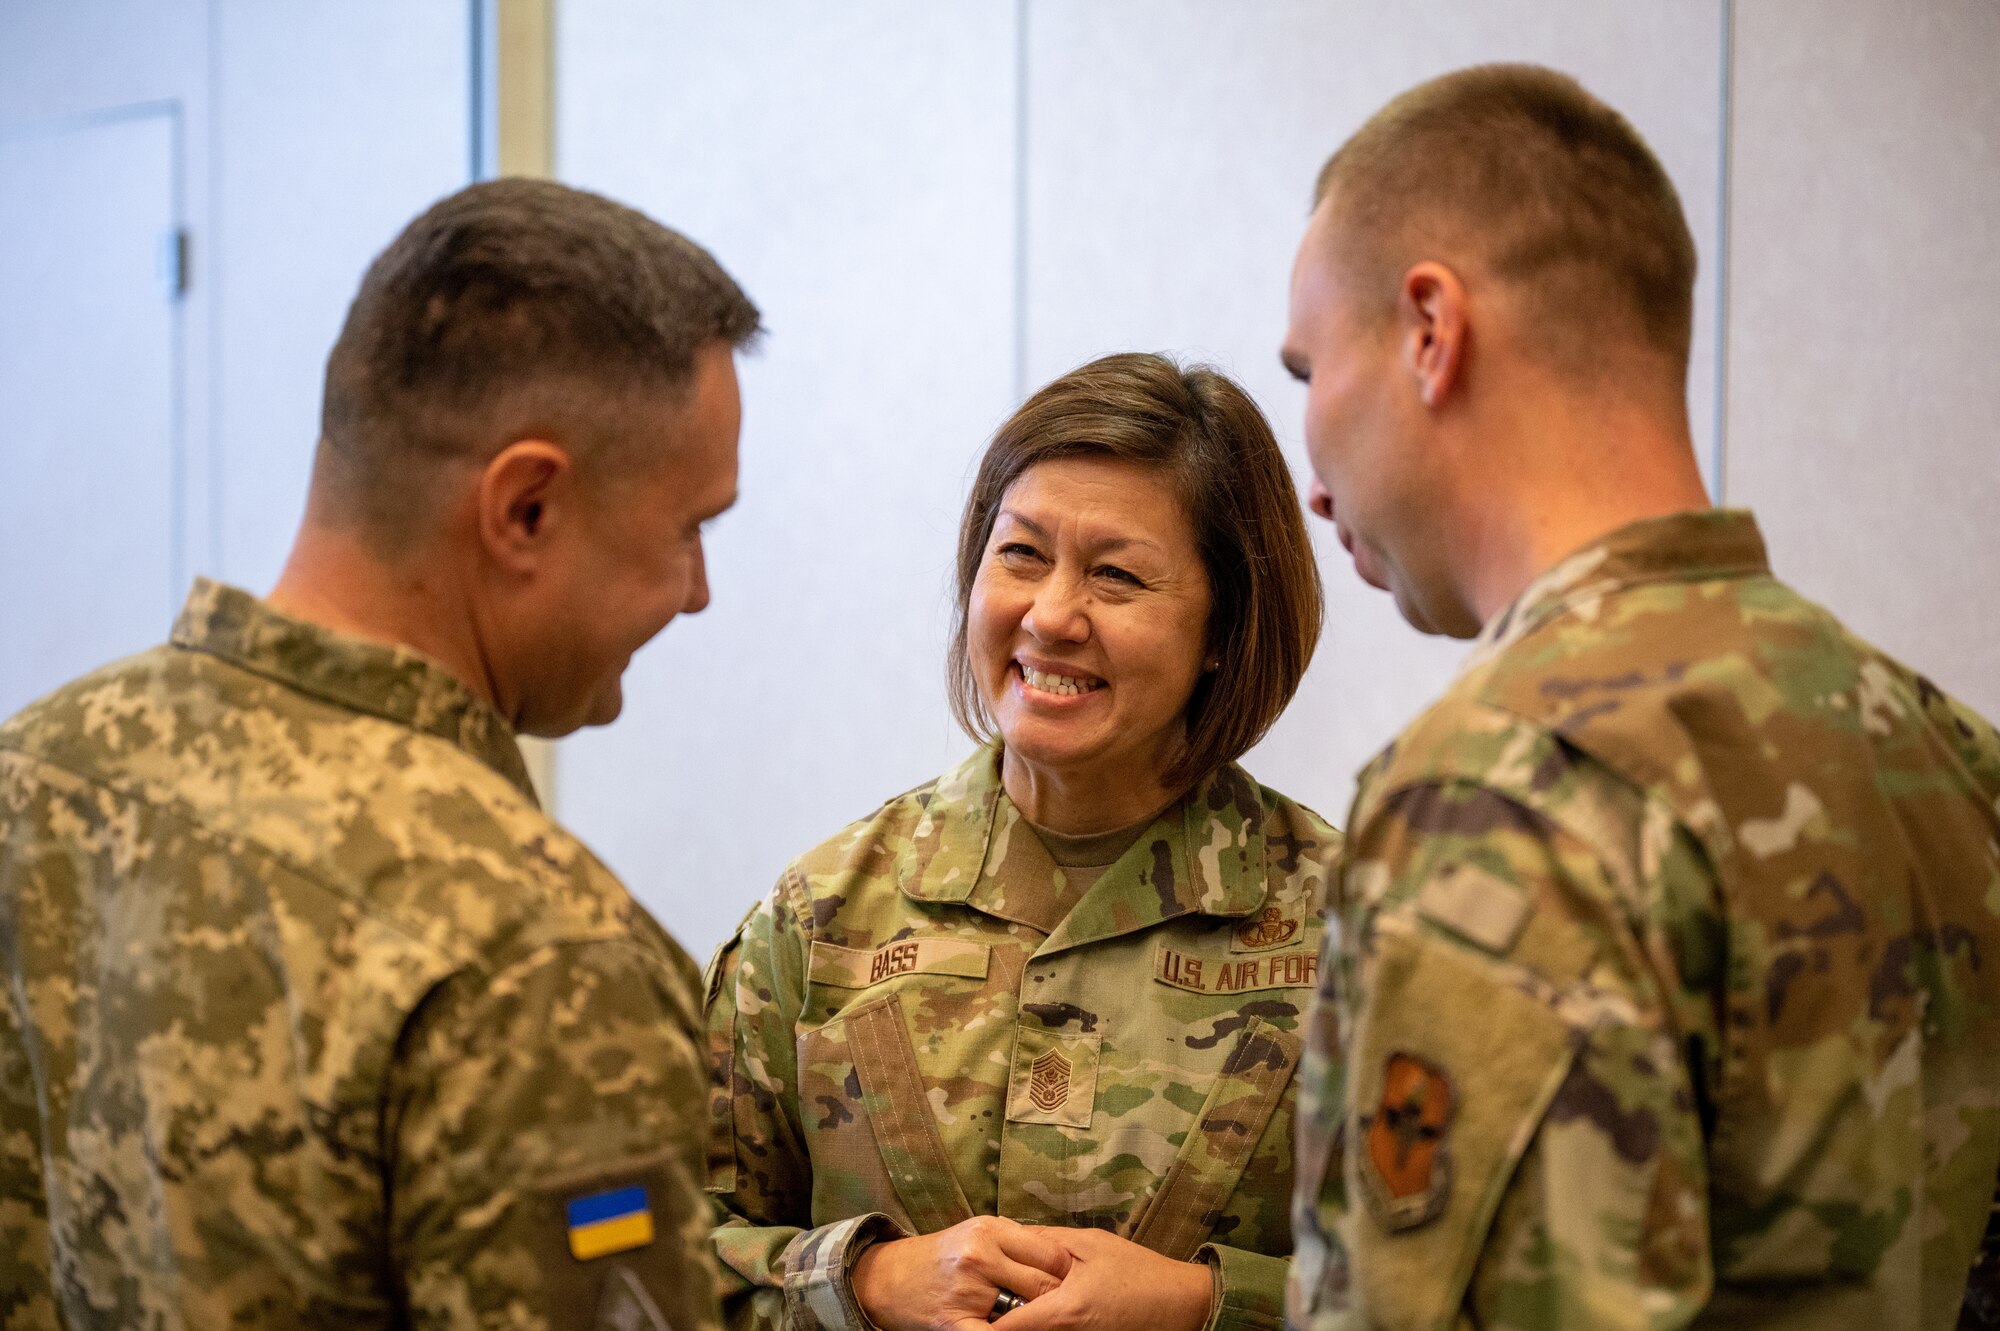 31 Command senior enlisted leaders from 29 nations joined together for the 2023 European Senior Enlisted Leader Summit in Ljubljana, Slovenia, September 4-7, 2023.